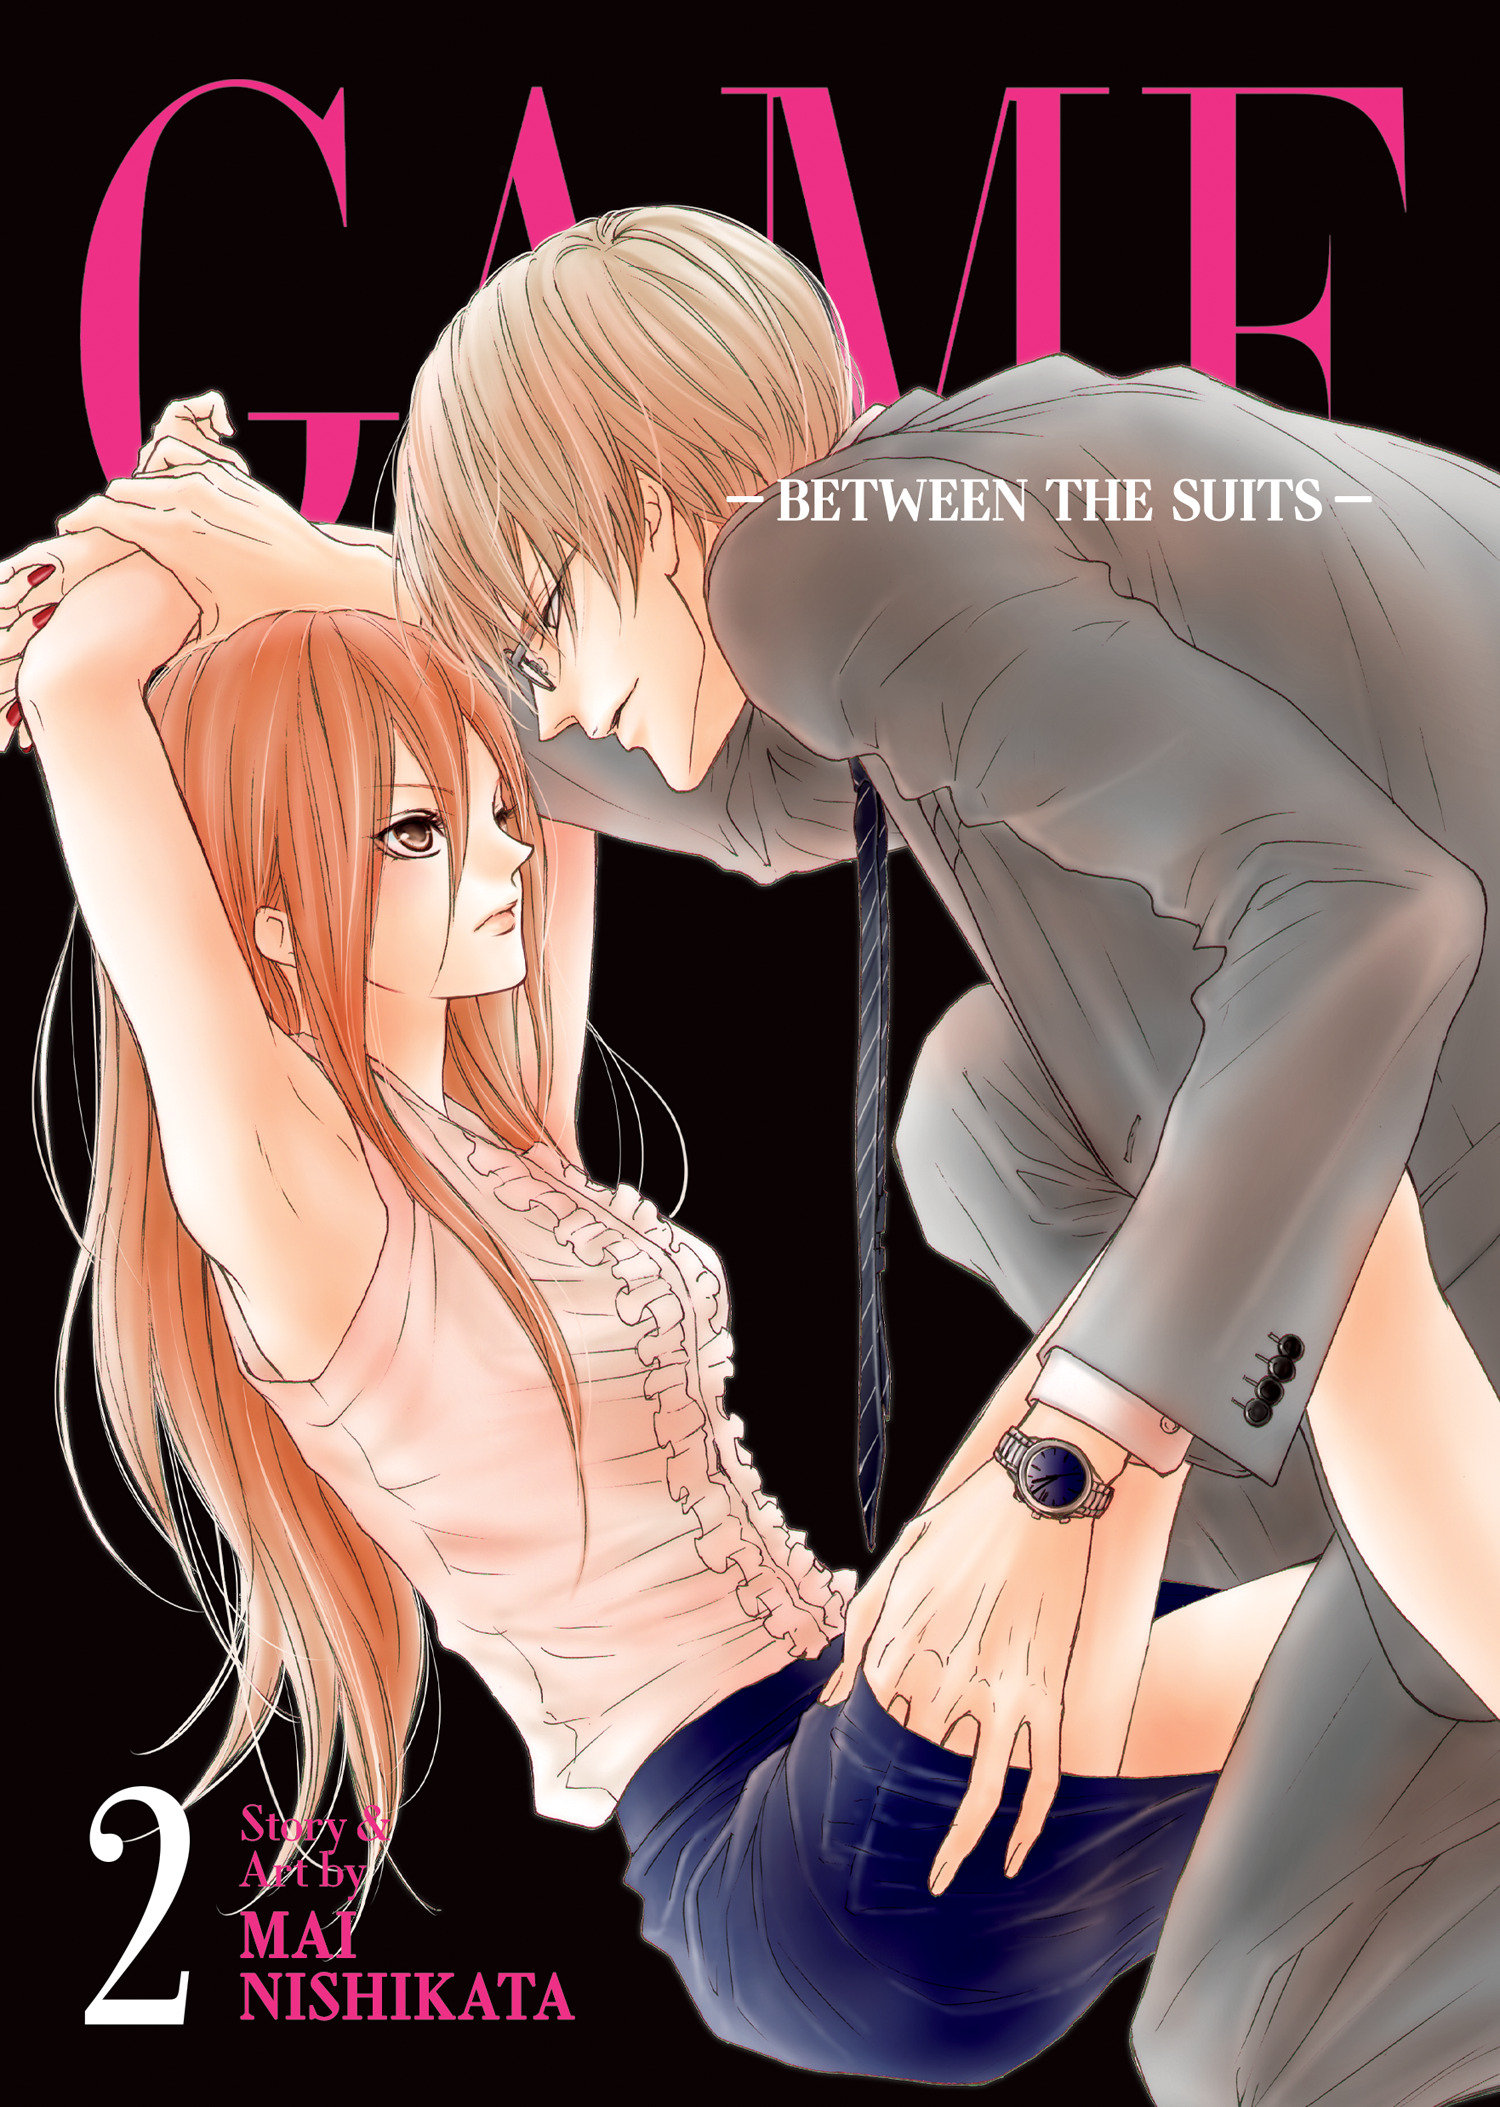 Game Between Suits Manga Volume 2 (Adults Only)